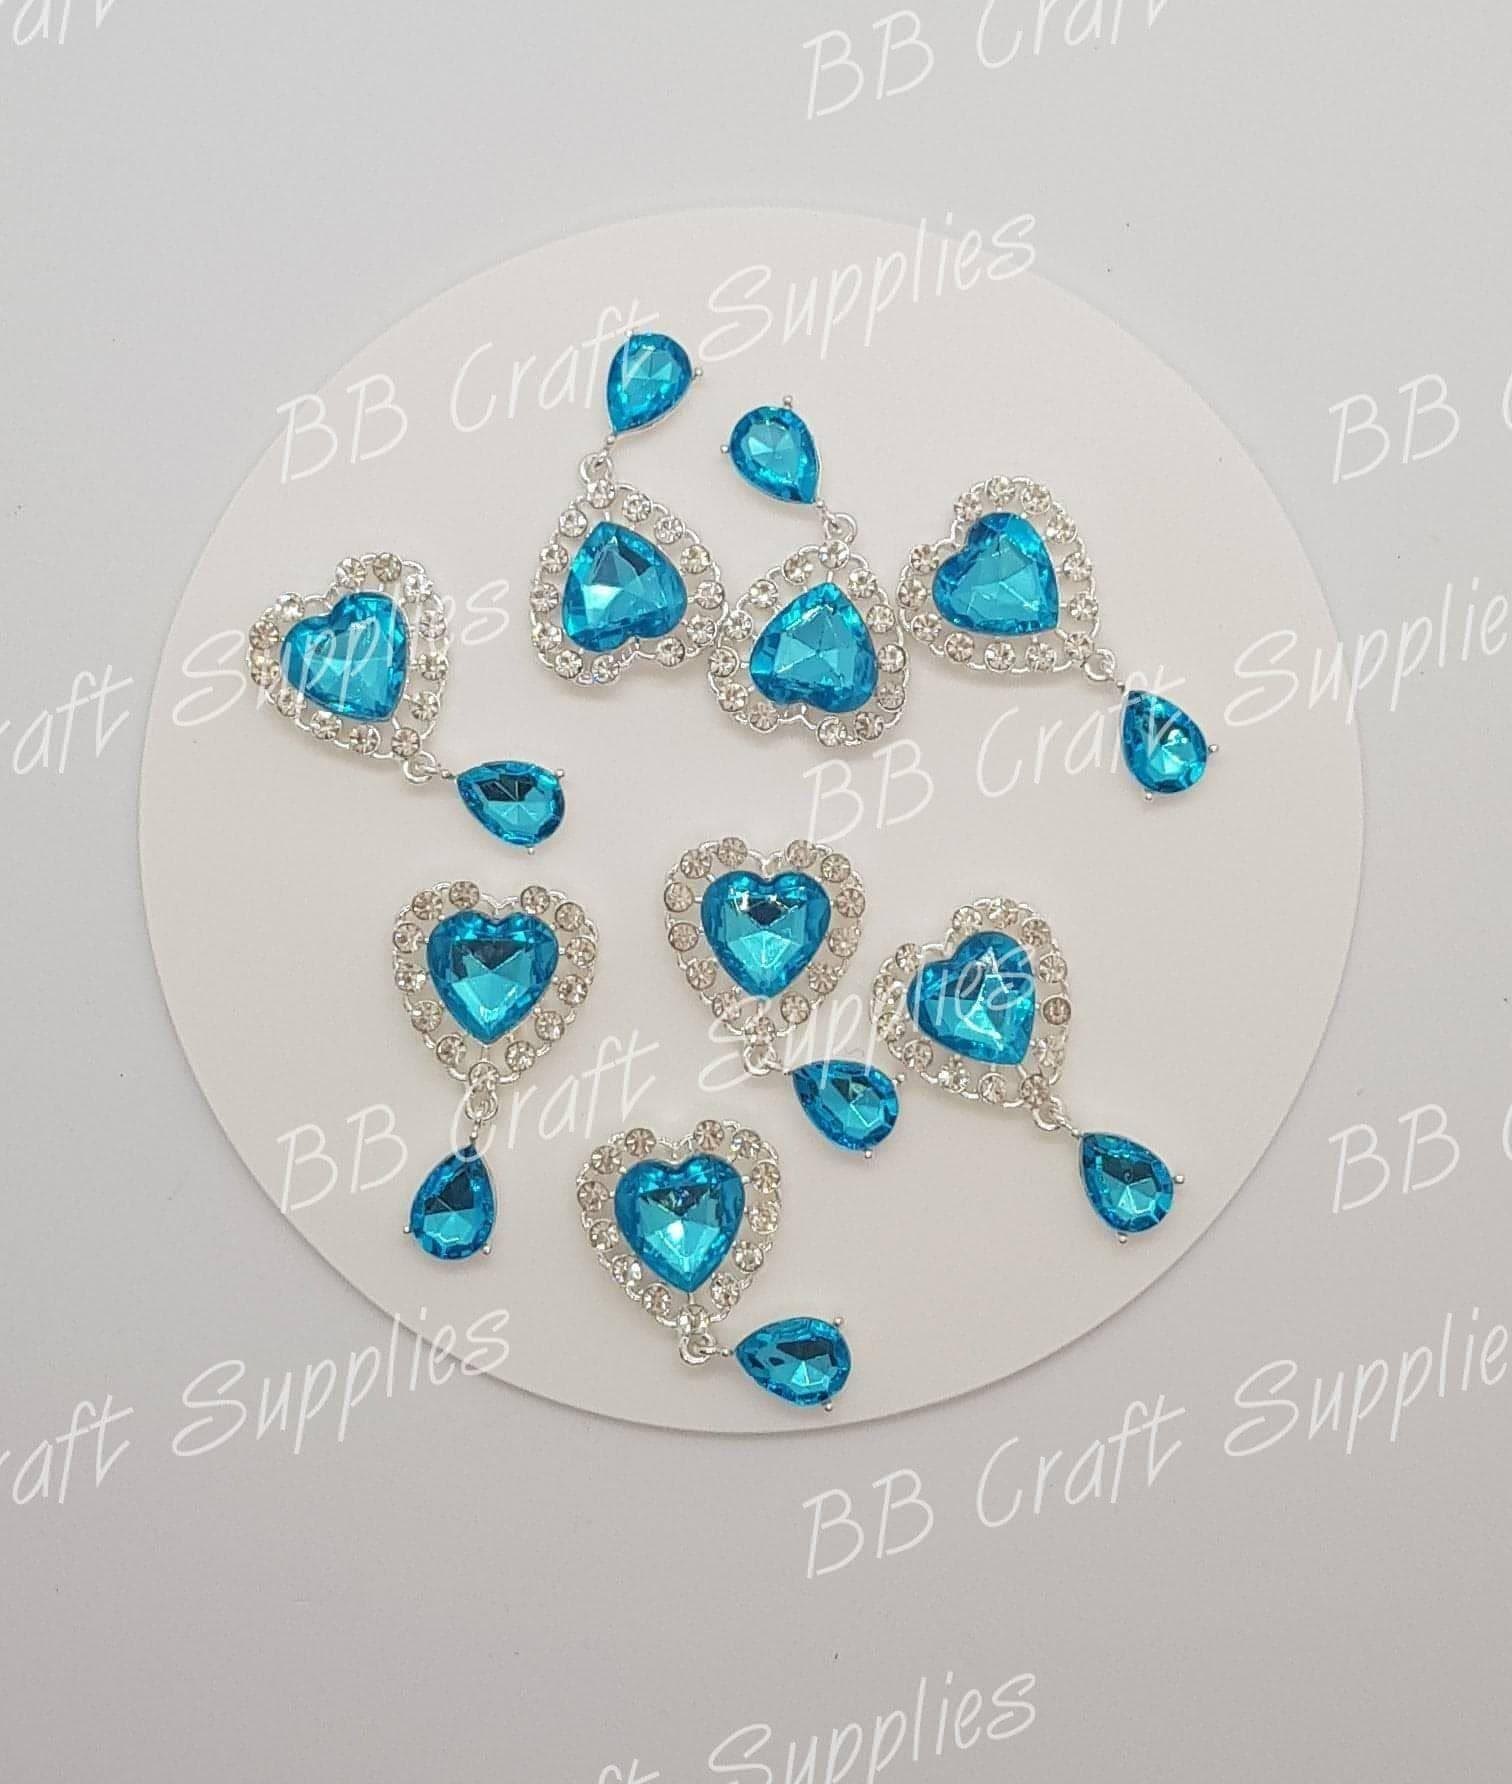 Rhinestone Heart with tear drop Embellishment's - drop, Embelishment, heart, Rhinestone, tear - Bare Butler Faux Leather Supplies 